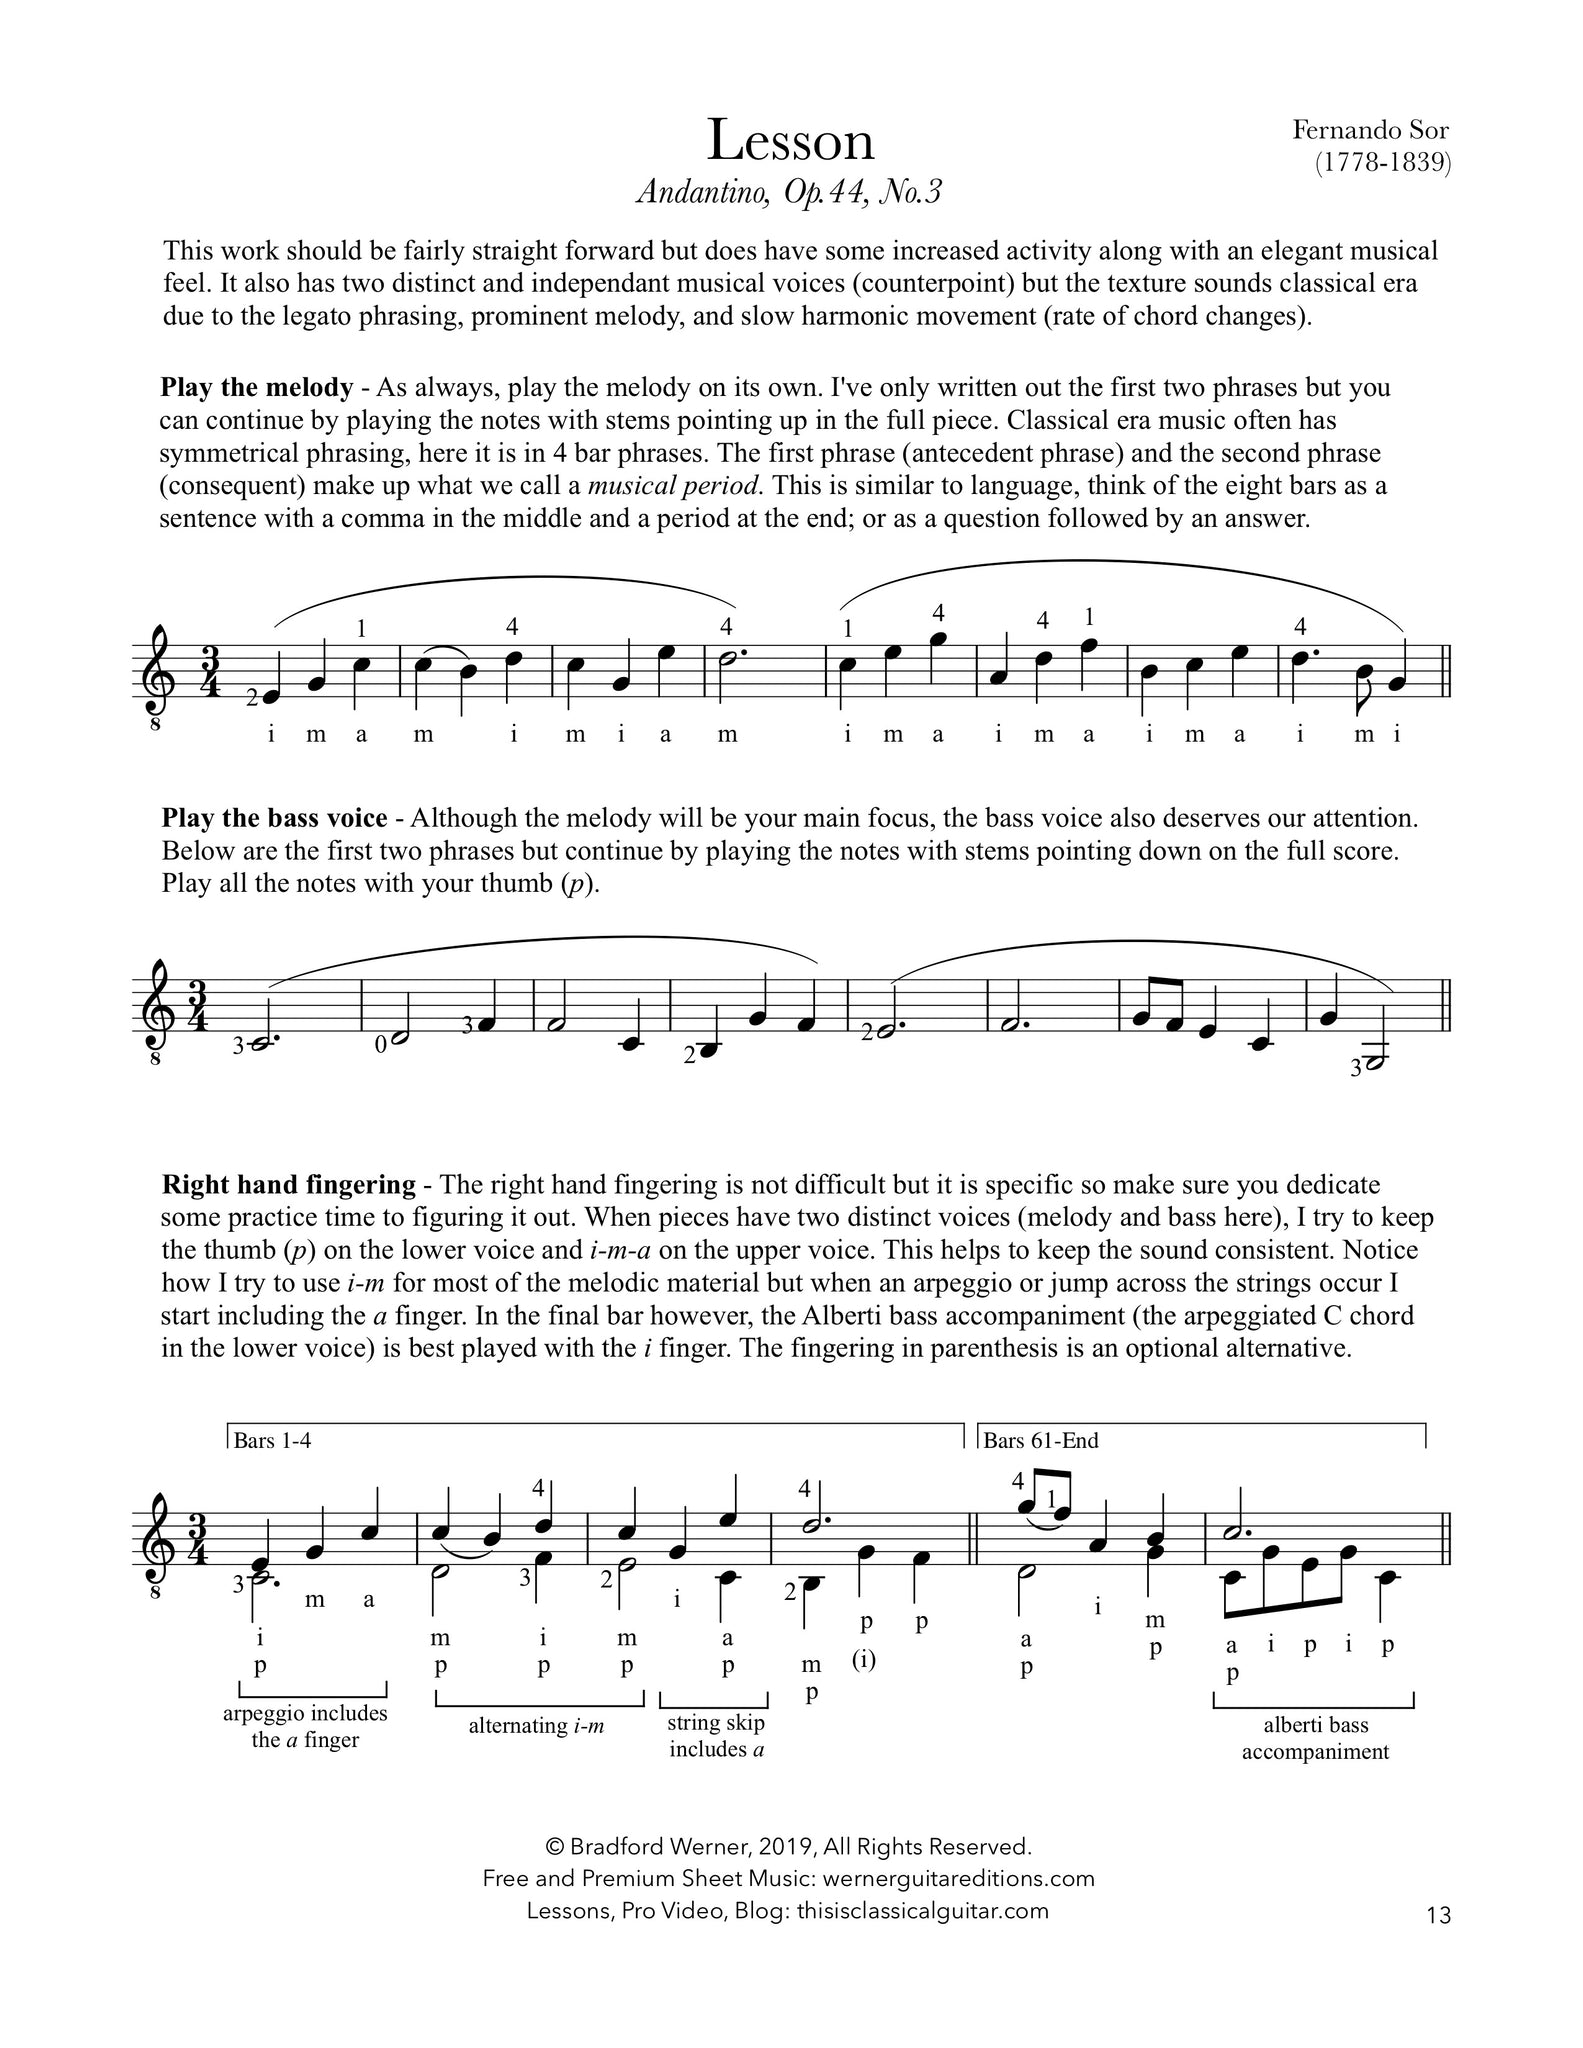 classical guitar repertoire by difficulty